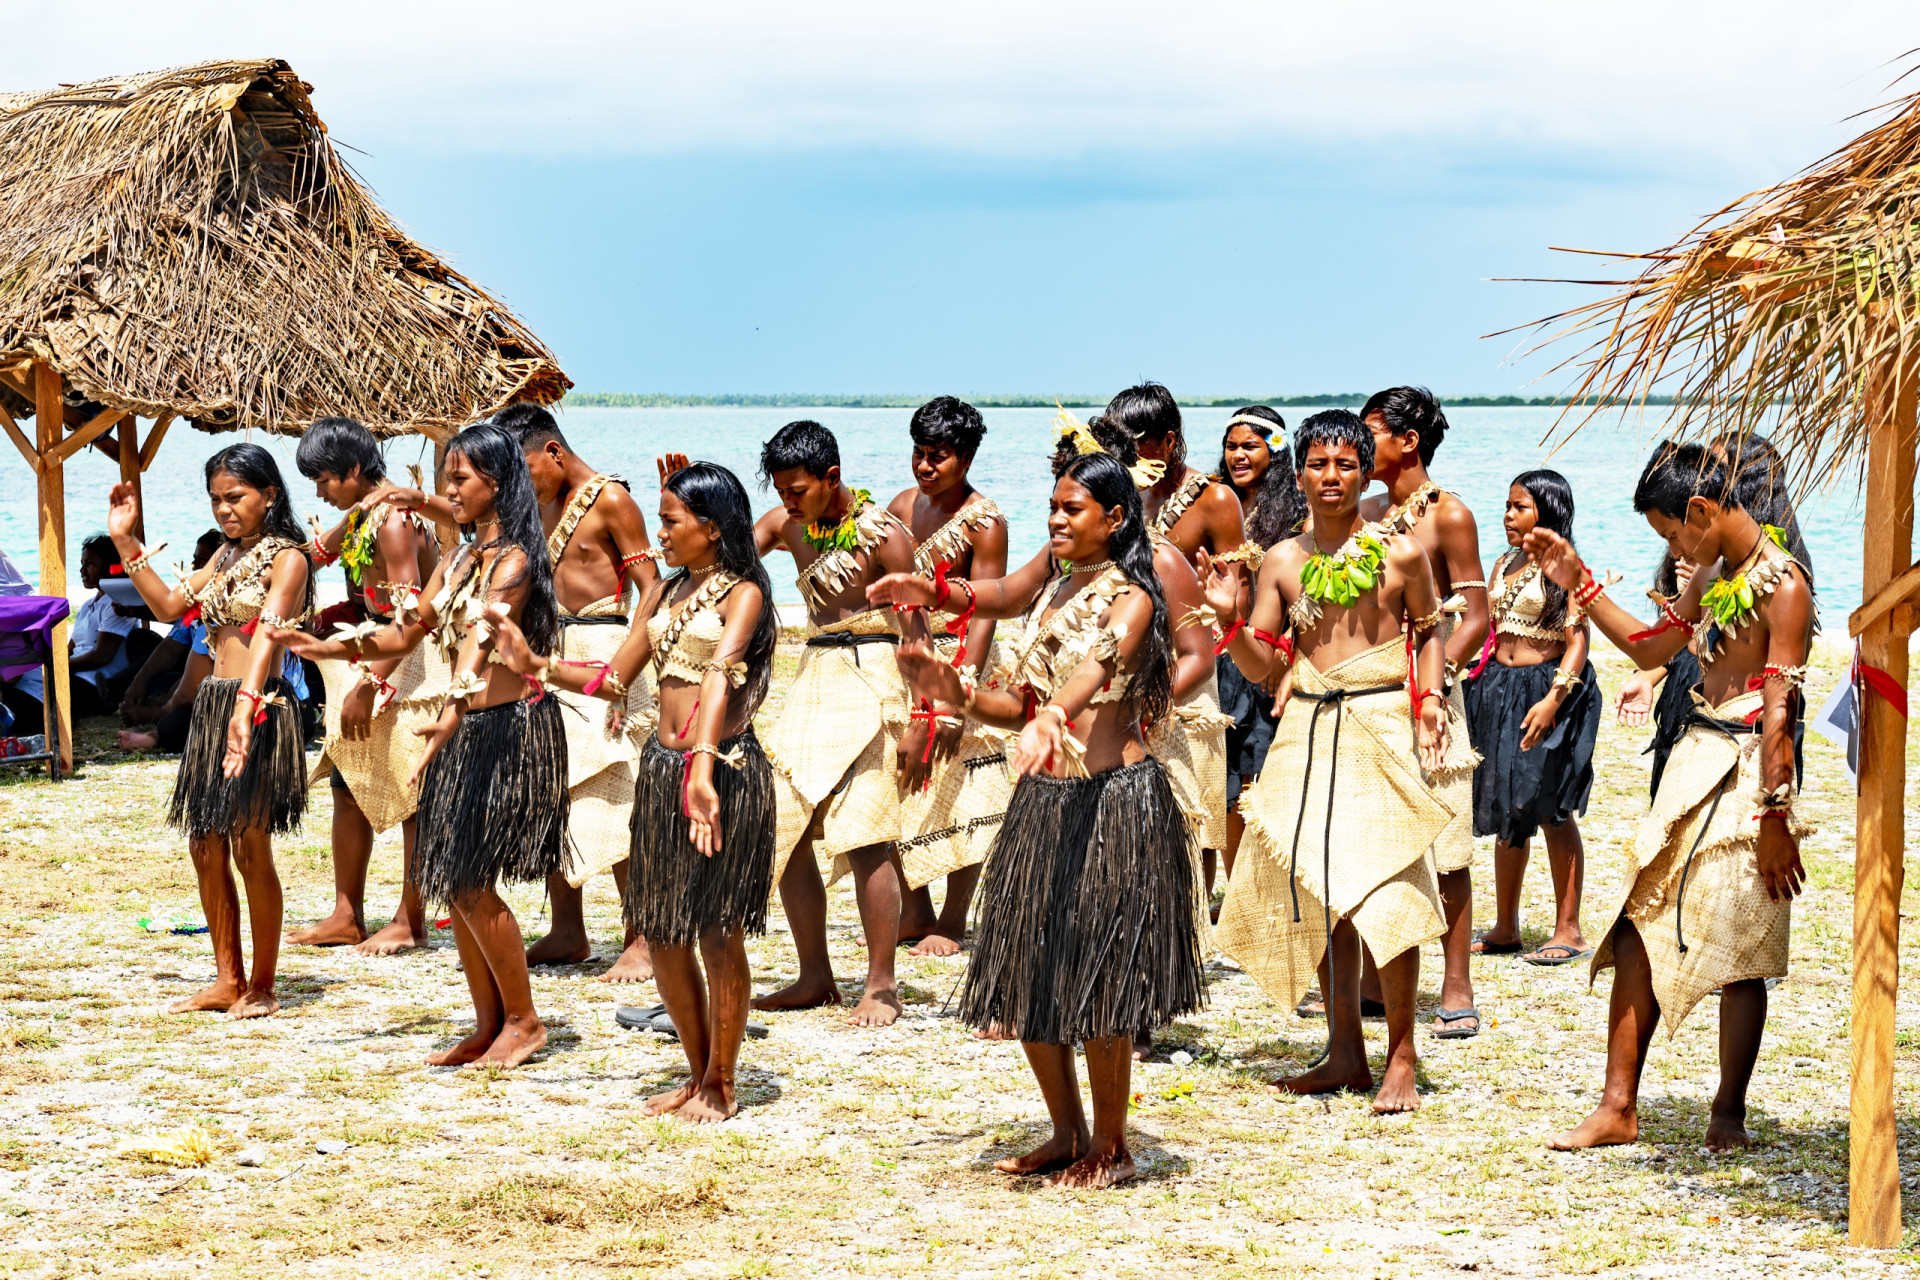 <p>Kiribati culture is rich in traditions, with a strong emphasis on community, family, and respect for elders. Traditional dances, music, and crafts are also integral parts of daily life. In fact, much of the nation’s culture and endurance depends on the continuation of storytelling rather than entertainment.</p><p>You may also like:<a href="https://www.starsinsider.com/n/192827?utm_source=msn.com&utm_medium=display&utm_campaign=referral_description&utm_content=717375en-us"> Babies who look exactly like celebrities!</a></p>